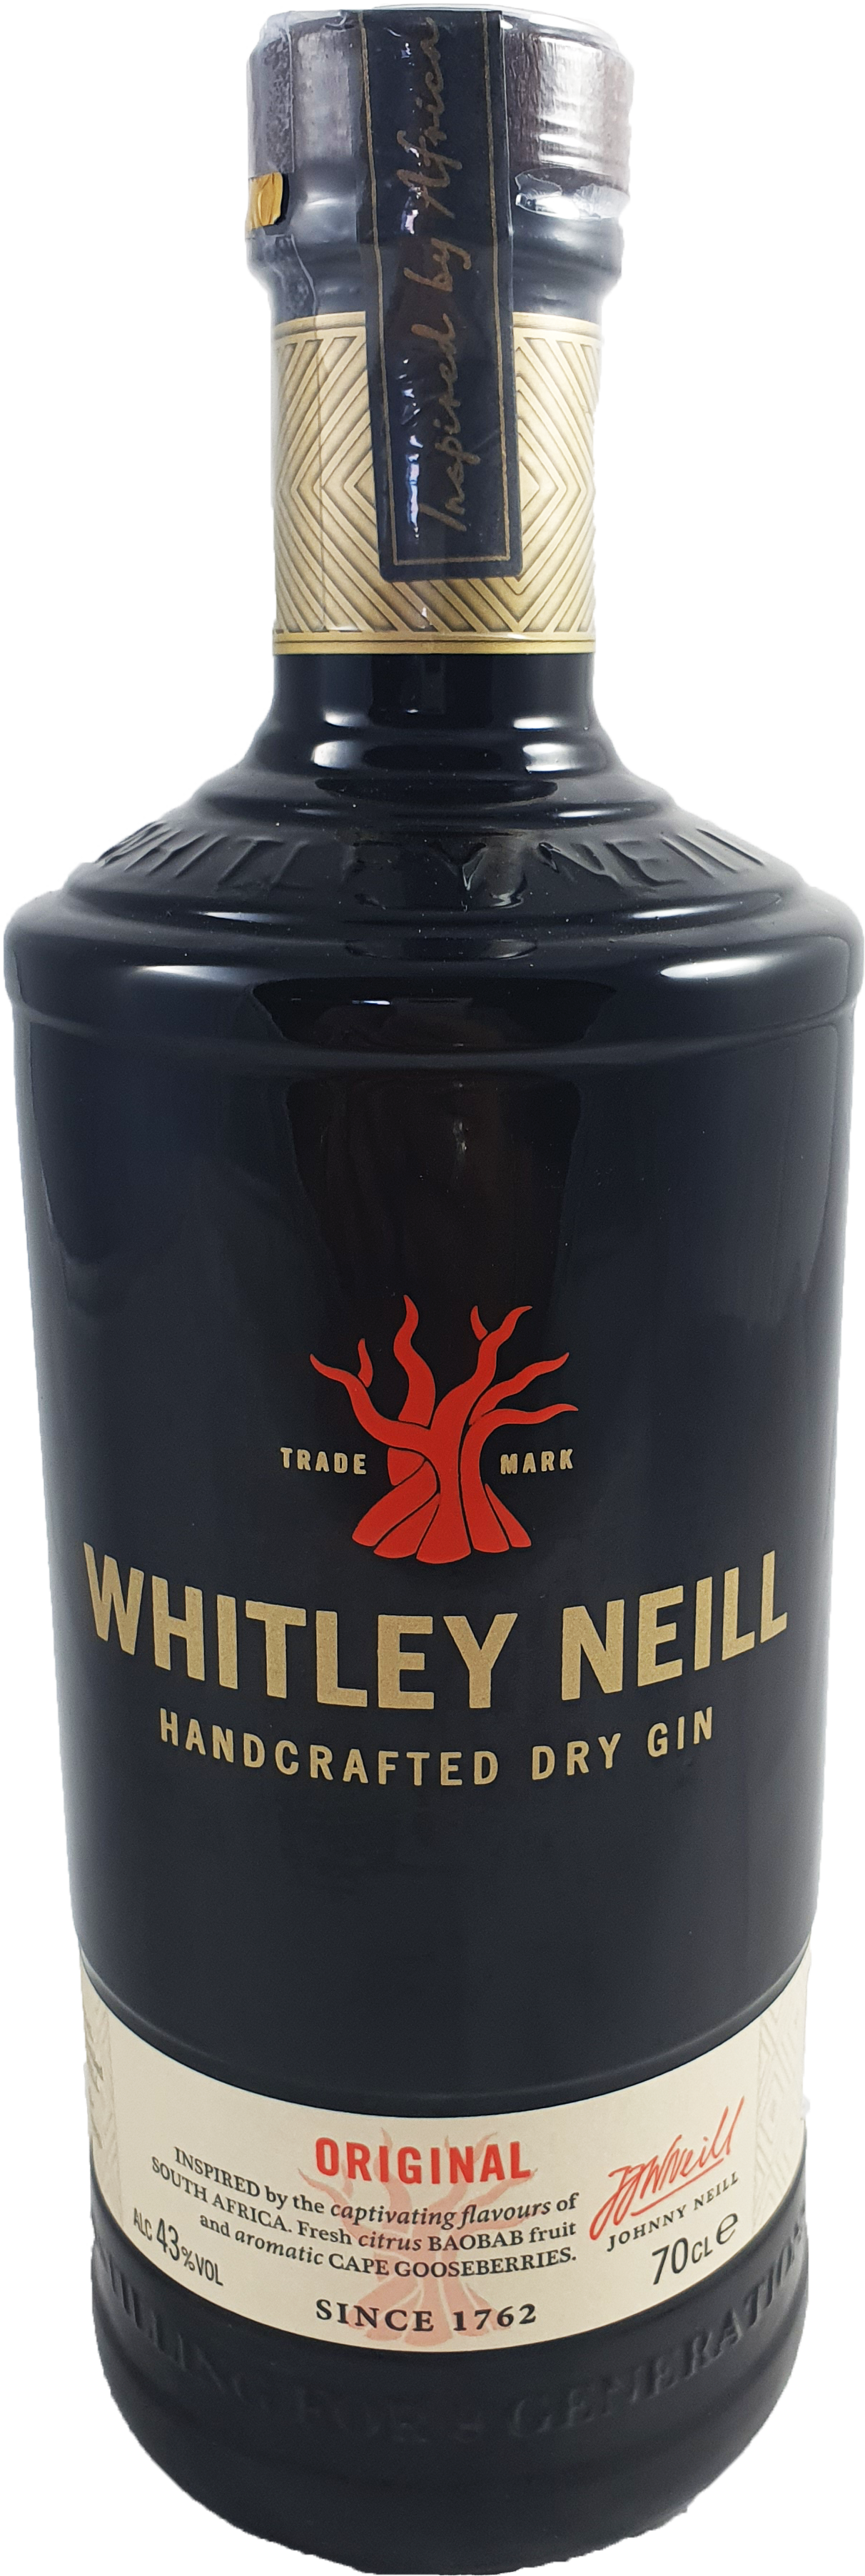 Whitley Neill Dry Gin 42% 